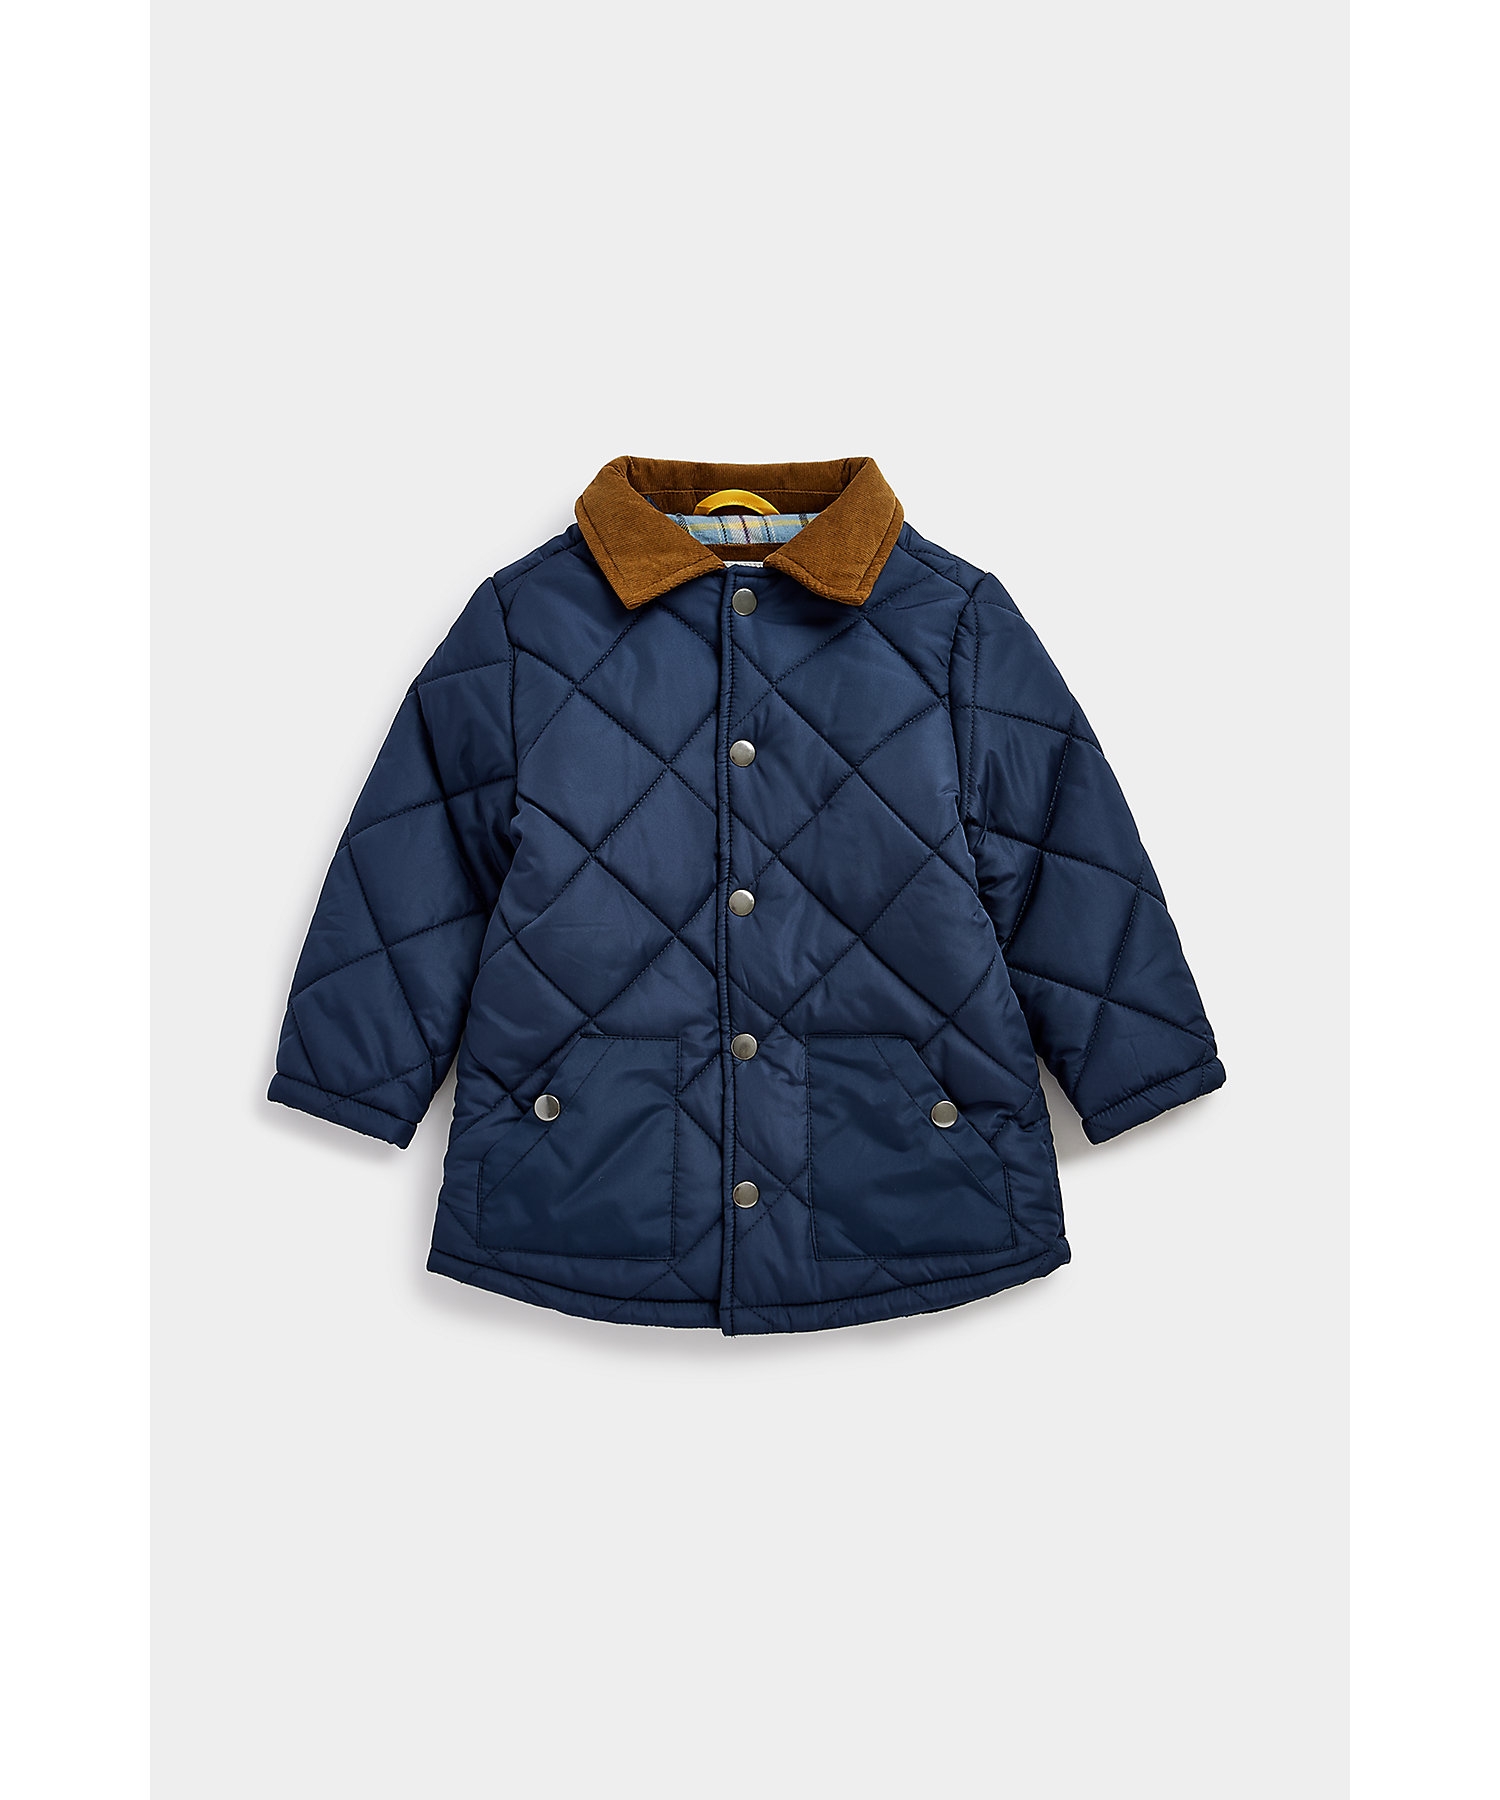 Mothercare | Boys Full Sleeves Jacket Contrast Collar-Navy